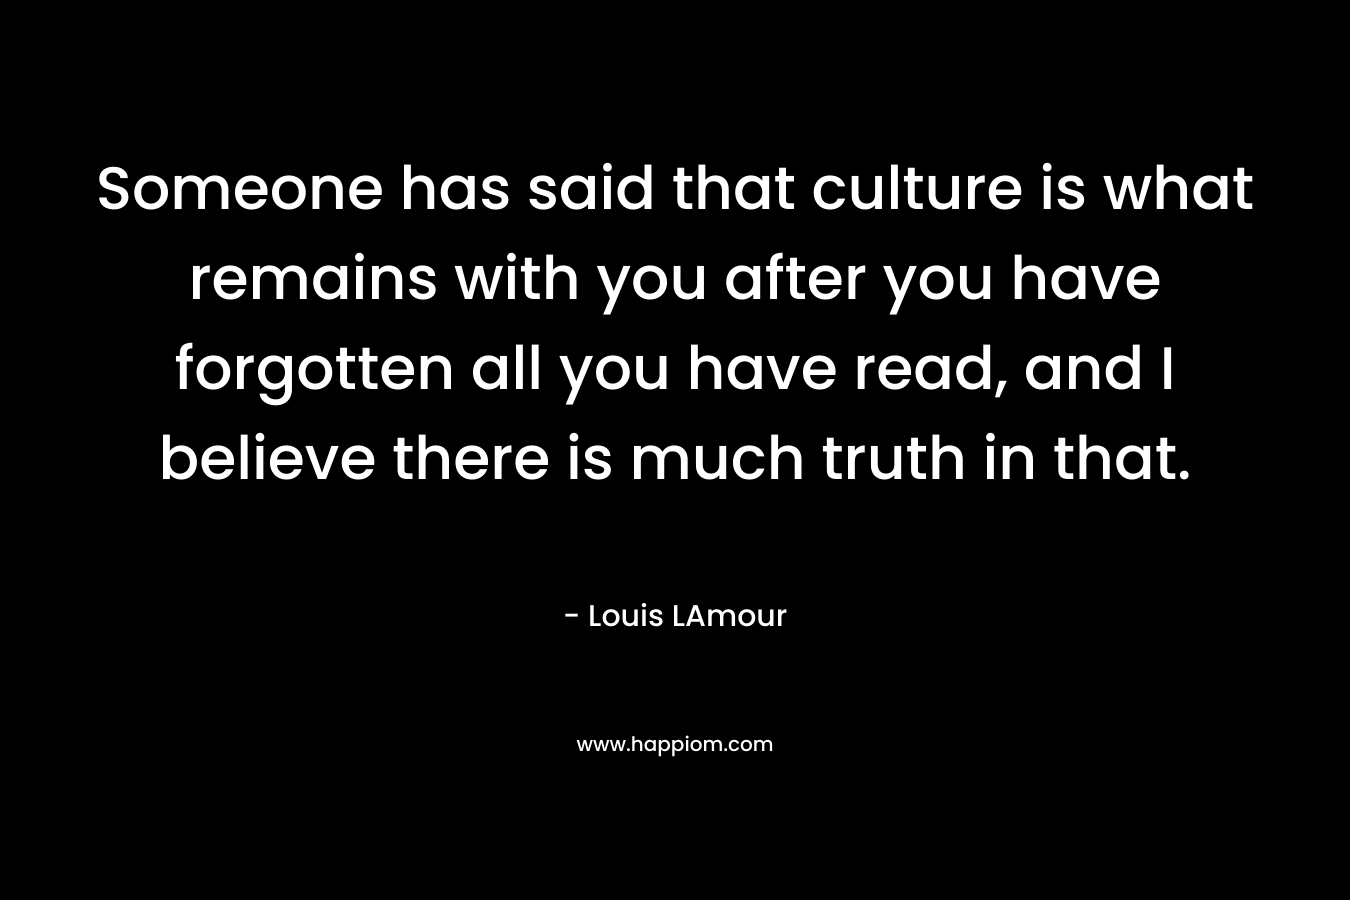 Someone has said that culture is what remains with you after you have forgotten all you have read, and I believe there is much truth in that. – Louis LAmour